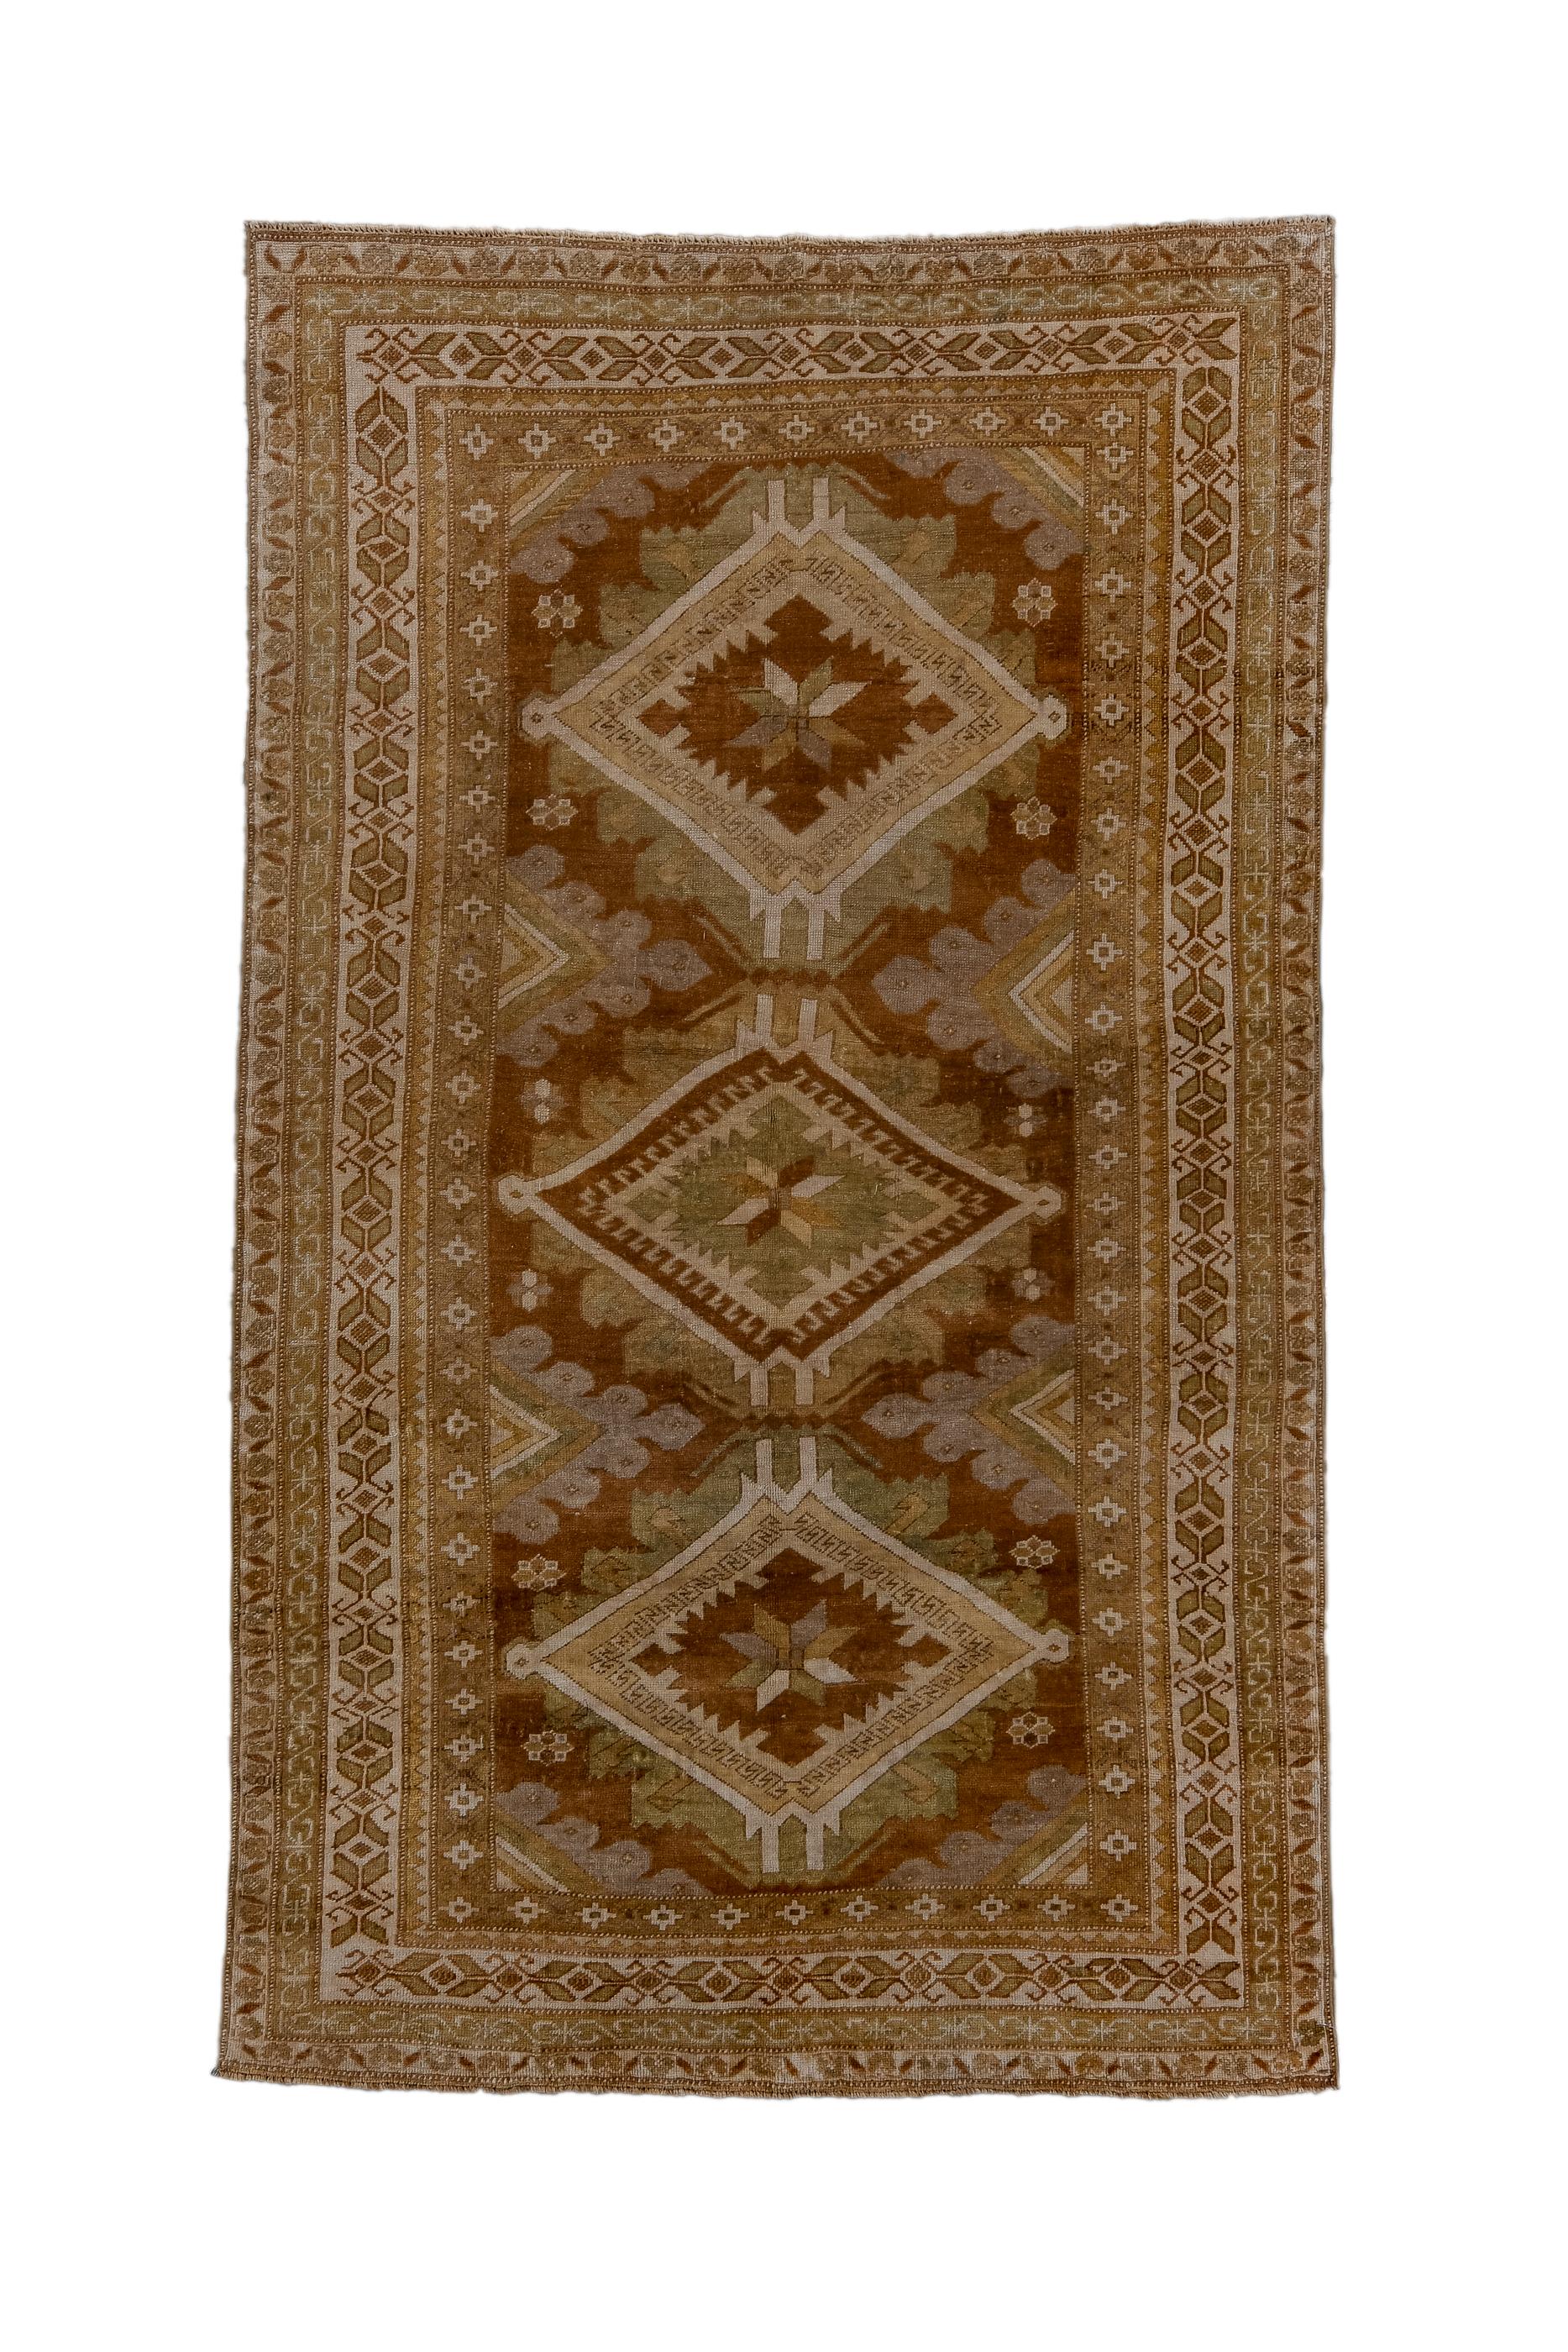 The Turkey red field displays three lozenge-shaped floating medallions, with lobate edges and star-in-ashik centres. Half, triangular elements, with lobed edges, project in from the sides. Green, straw and teal accents. Ecru major border with